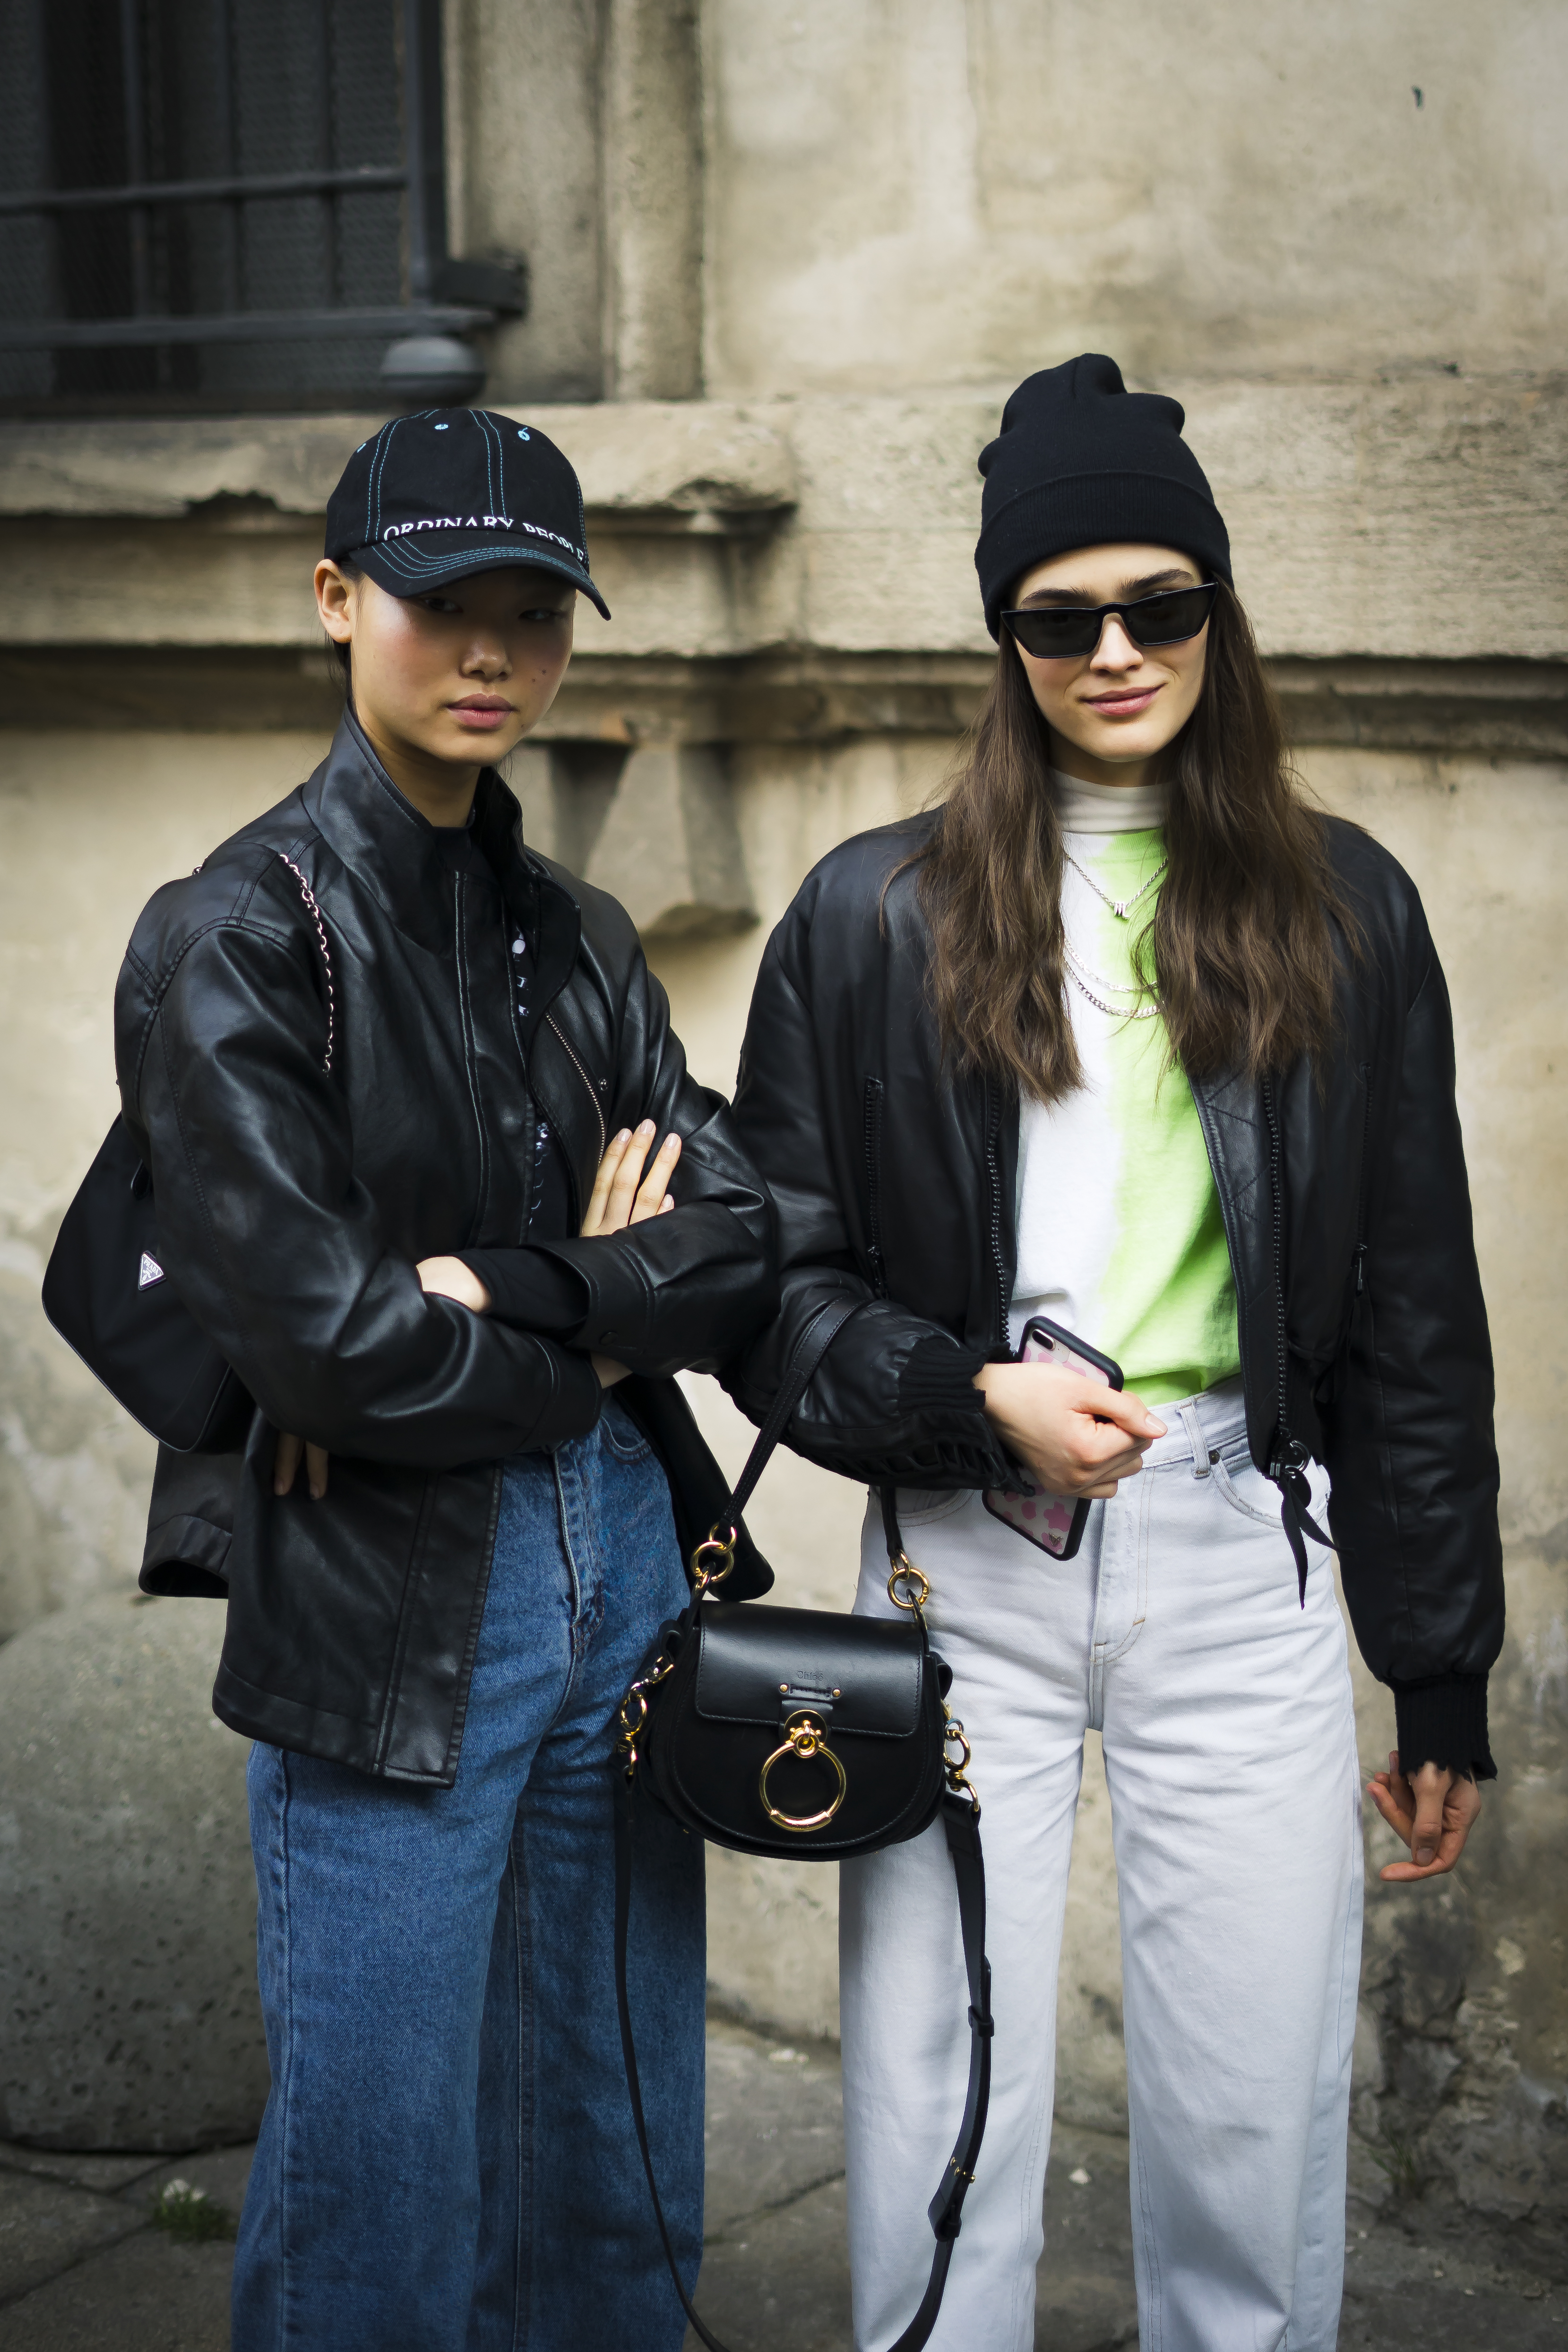 Channel Model Off Duty Style With These 4 Key Trends